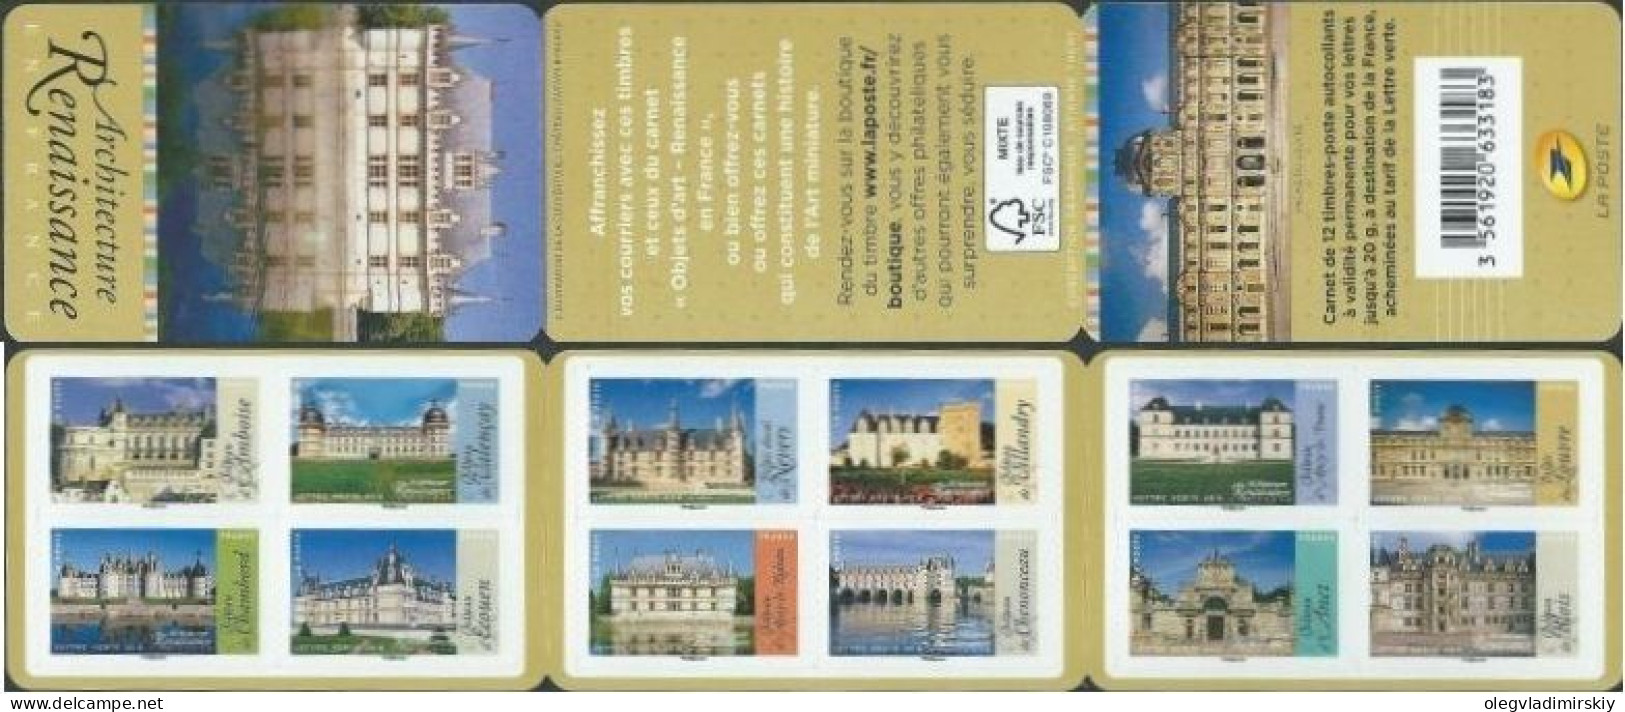 France 2015 Architecture Of Renaissance Castles Palaces Museums Set Of 12 Stamps In Booklet MNH - Castelli